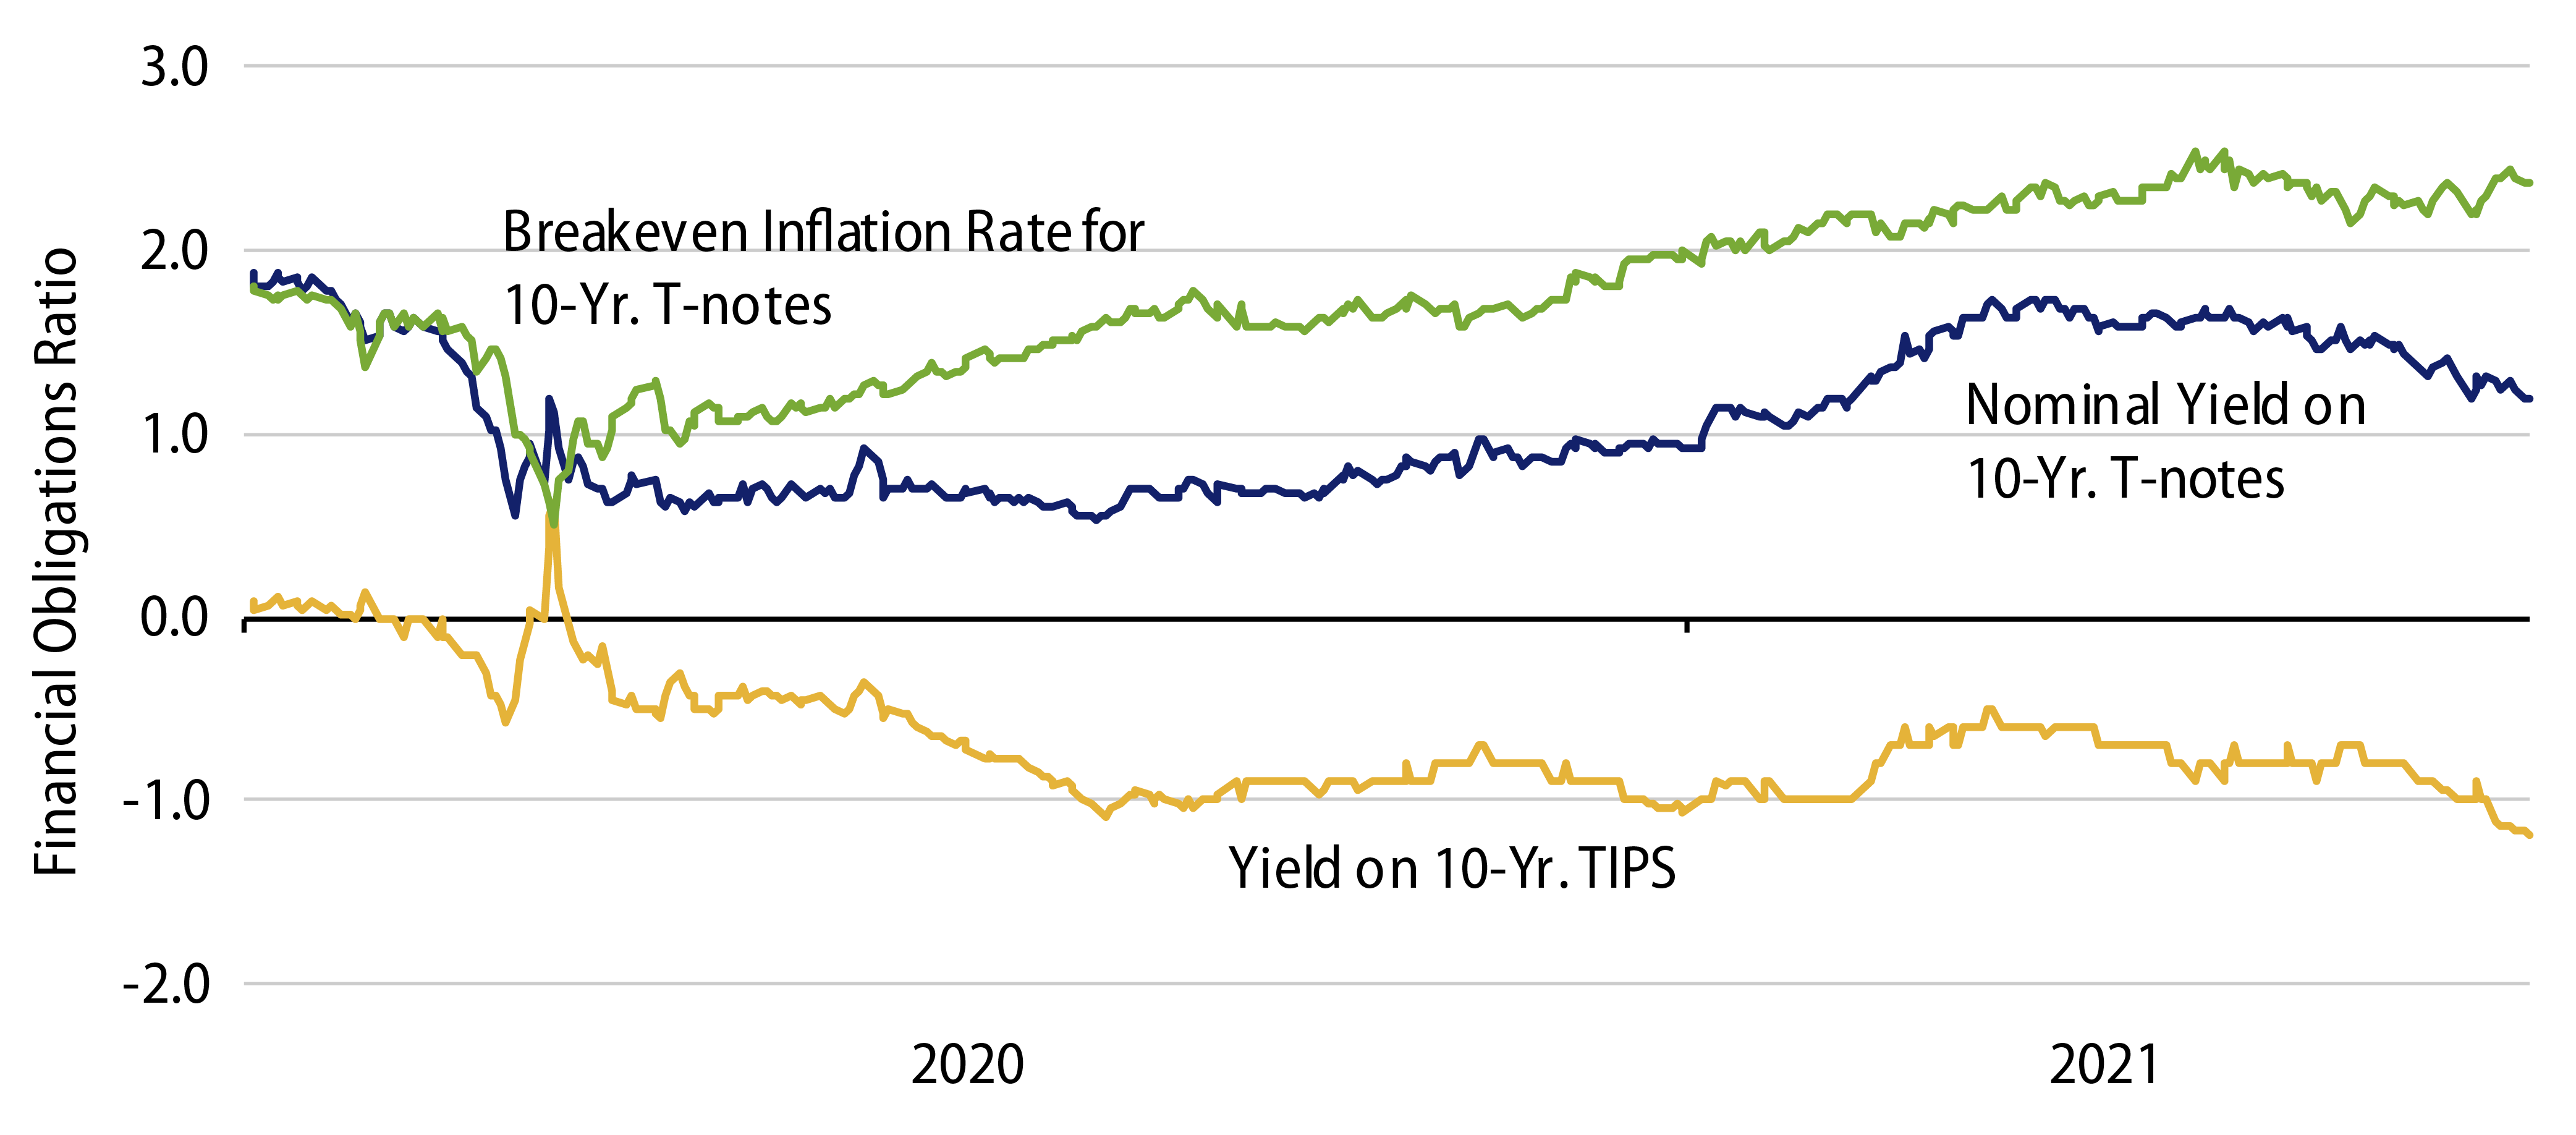 Explore Nominal Yields, Real Yields and Breakeven Inflation Rates